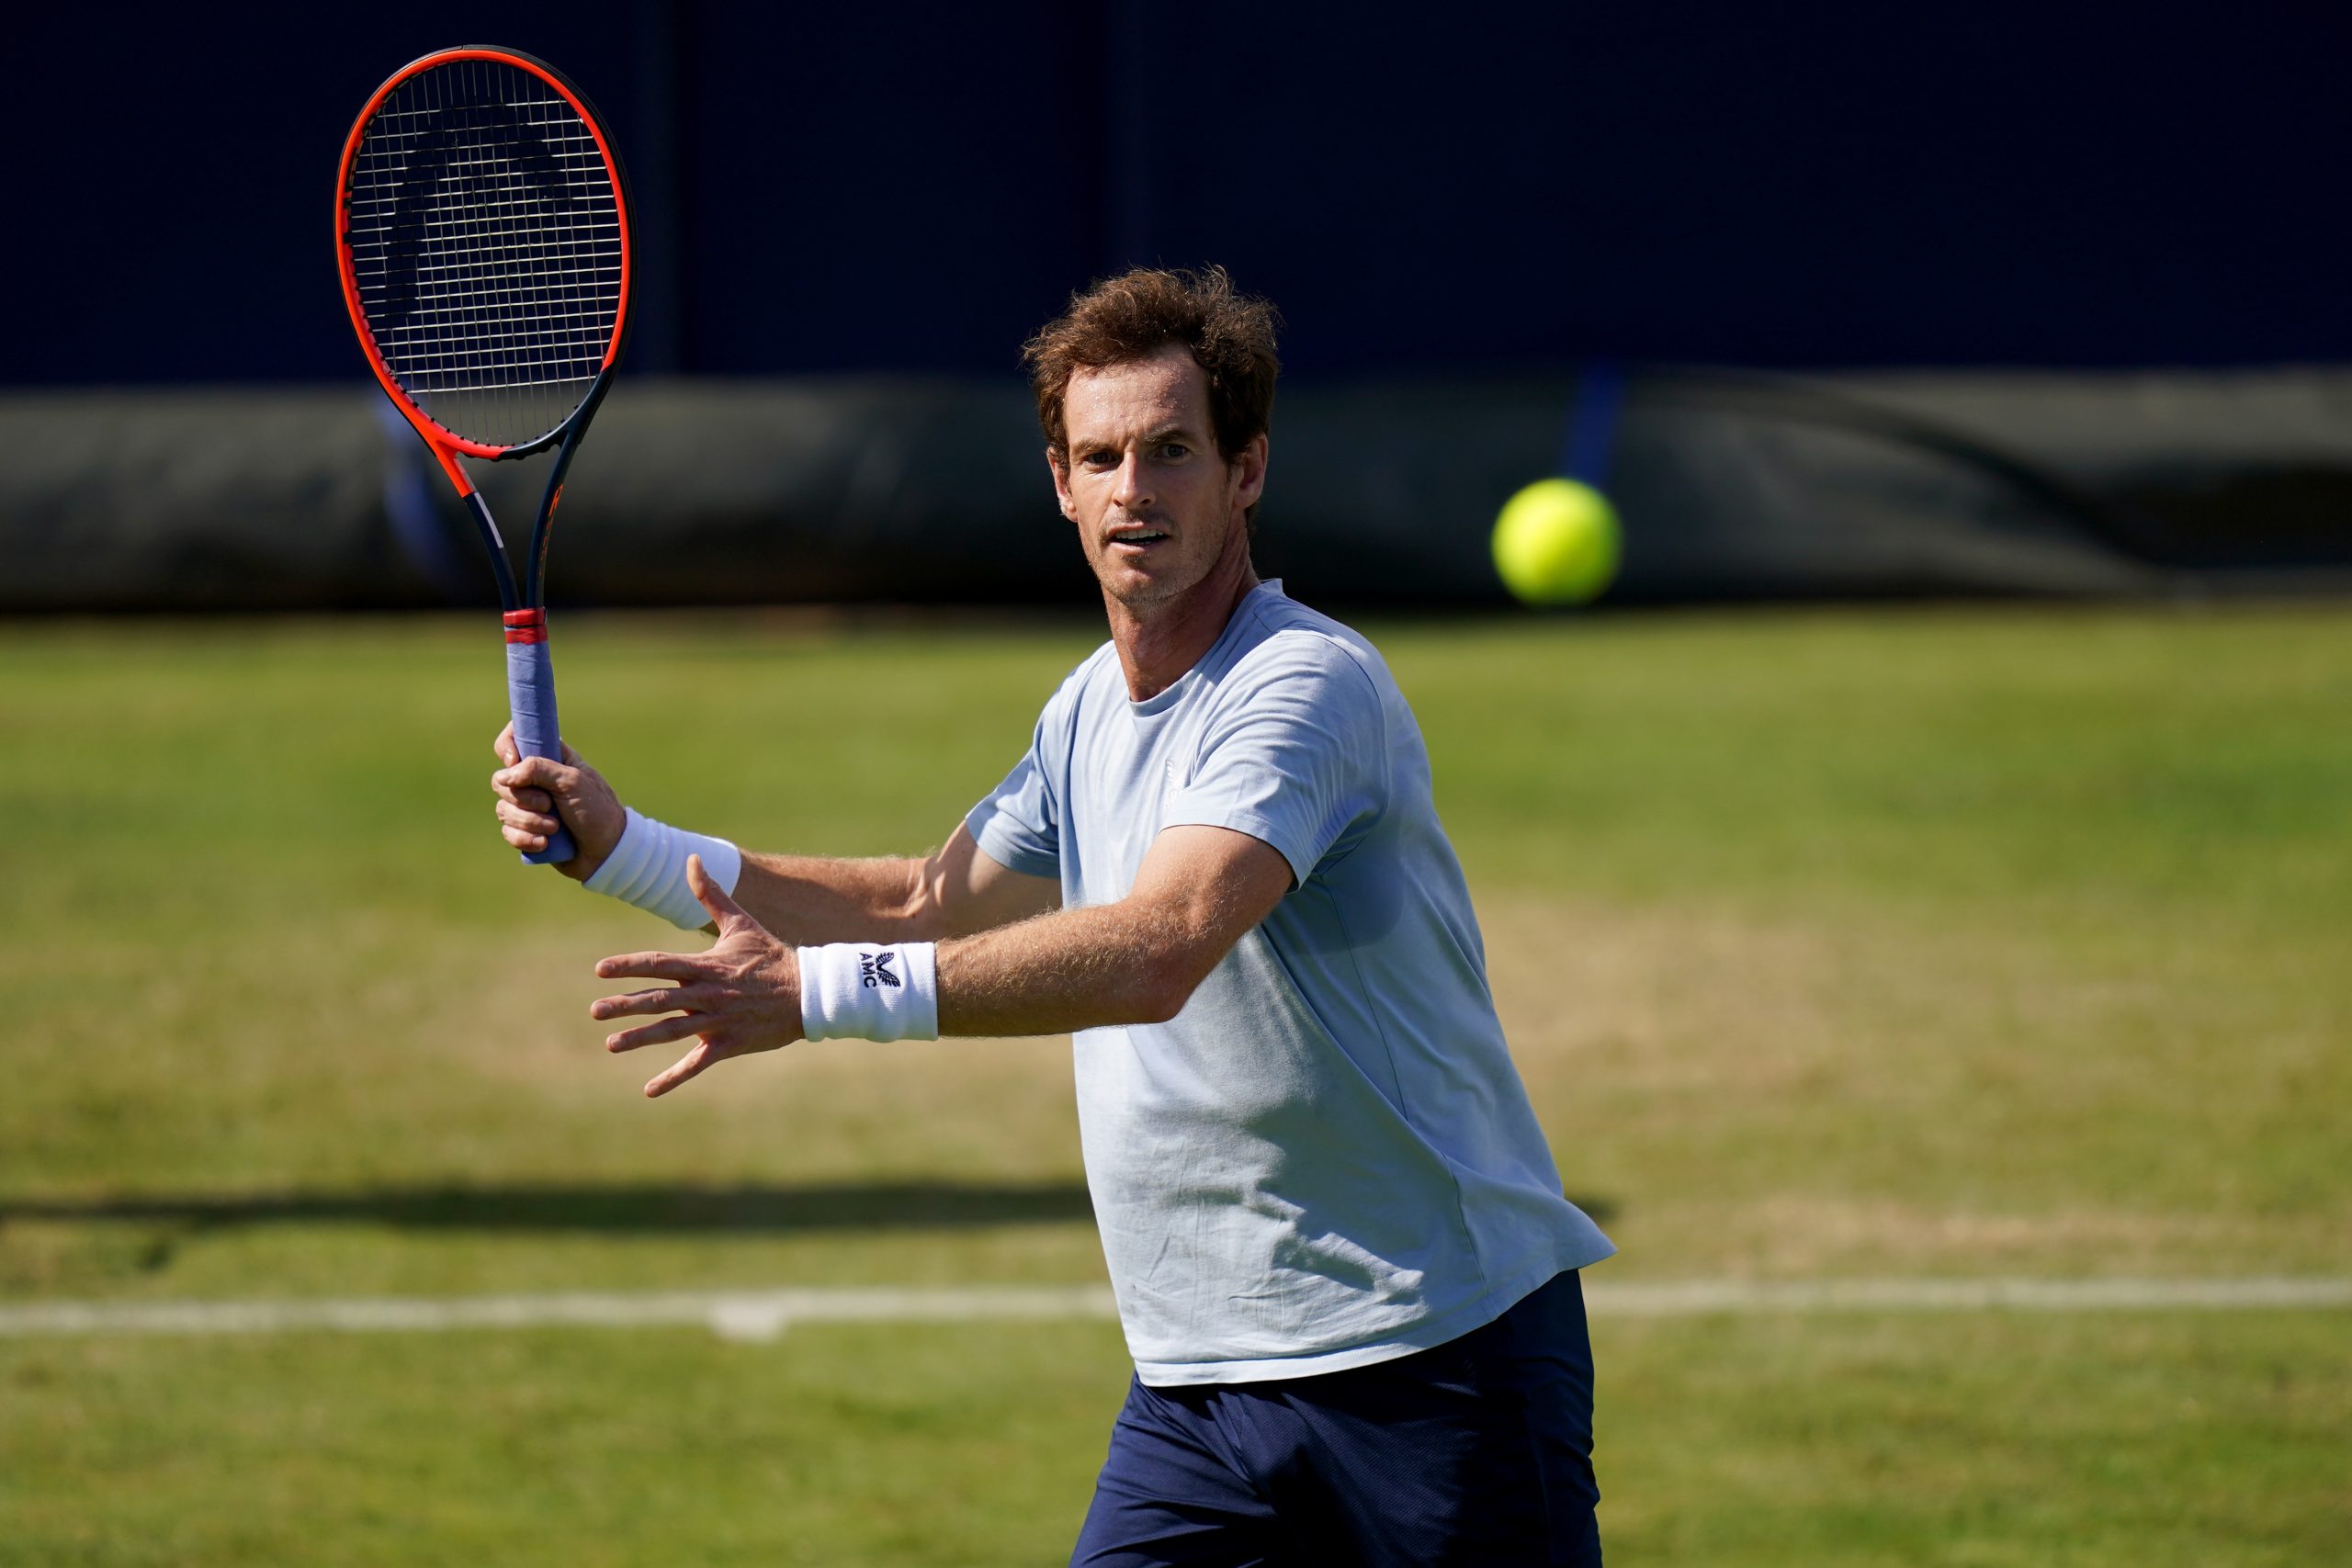 Andy Murray thinks about retirement but will not be ending his career just yet